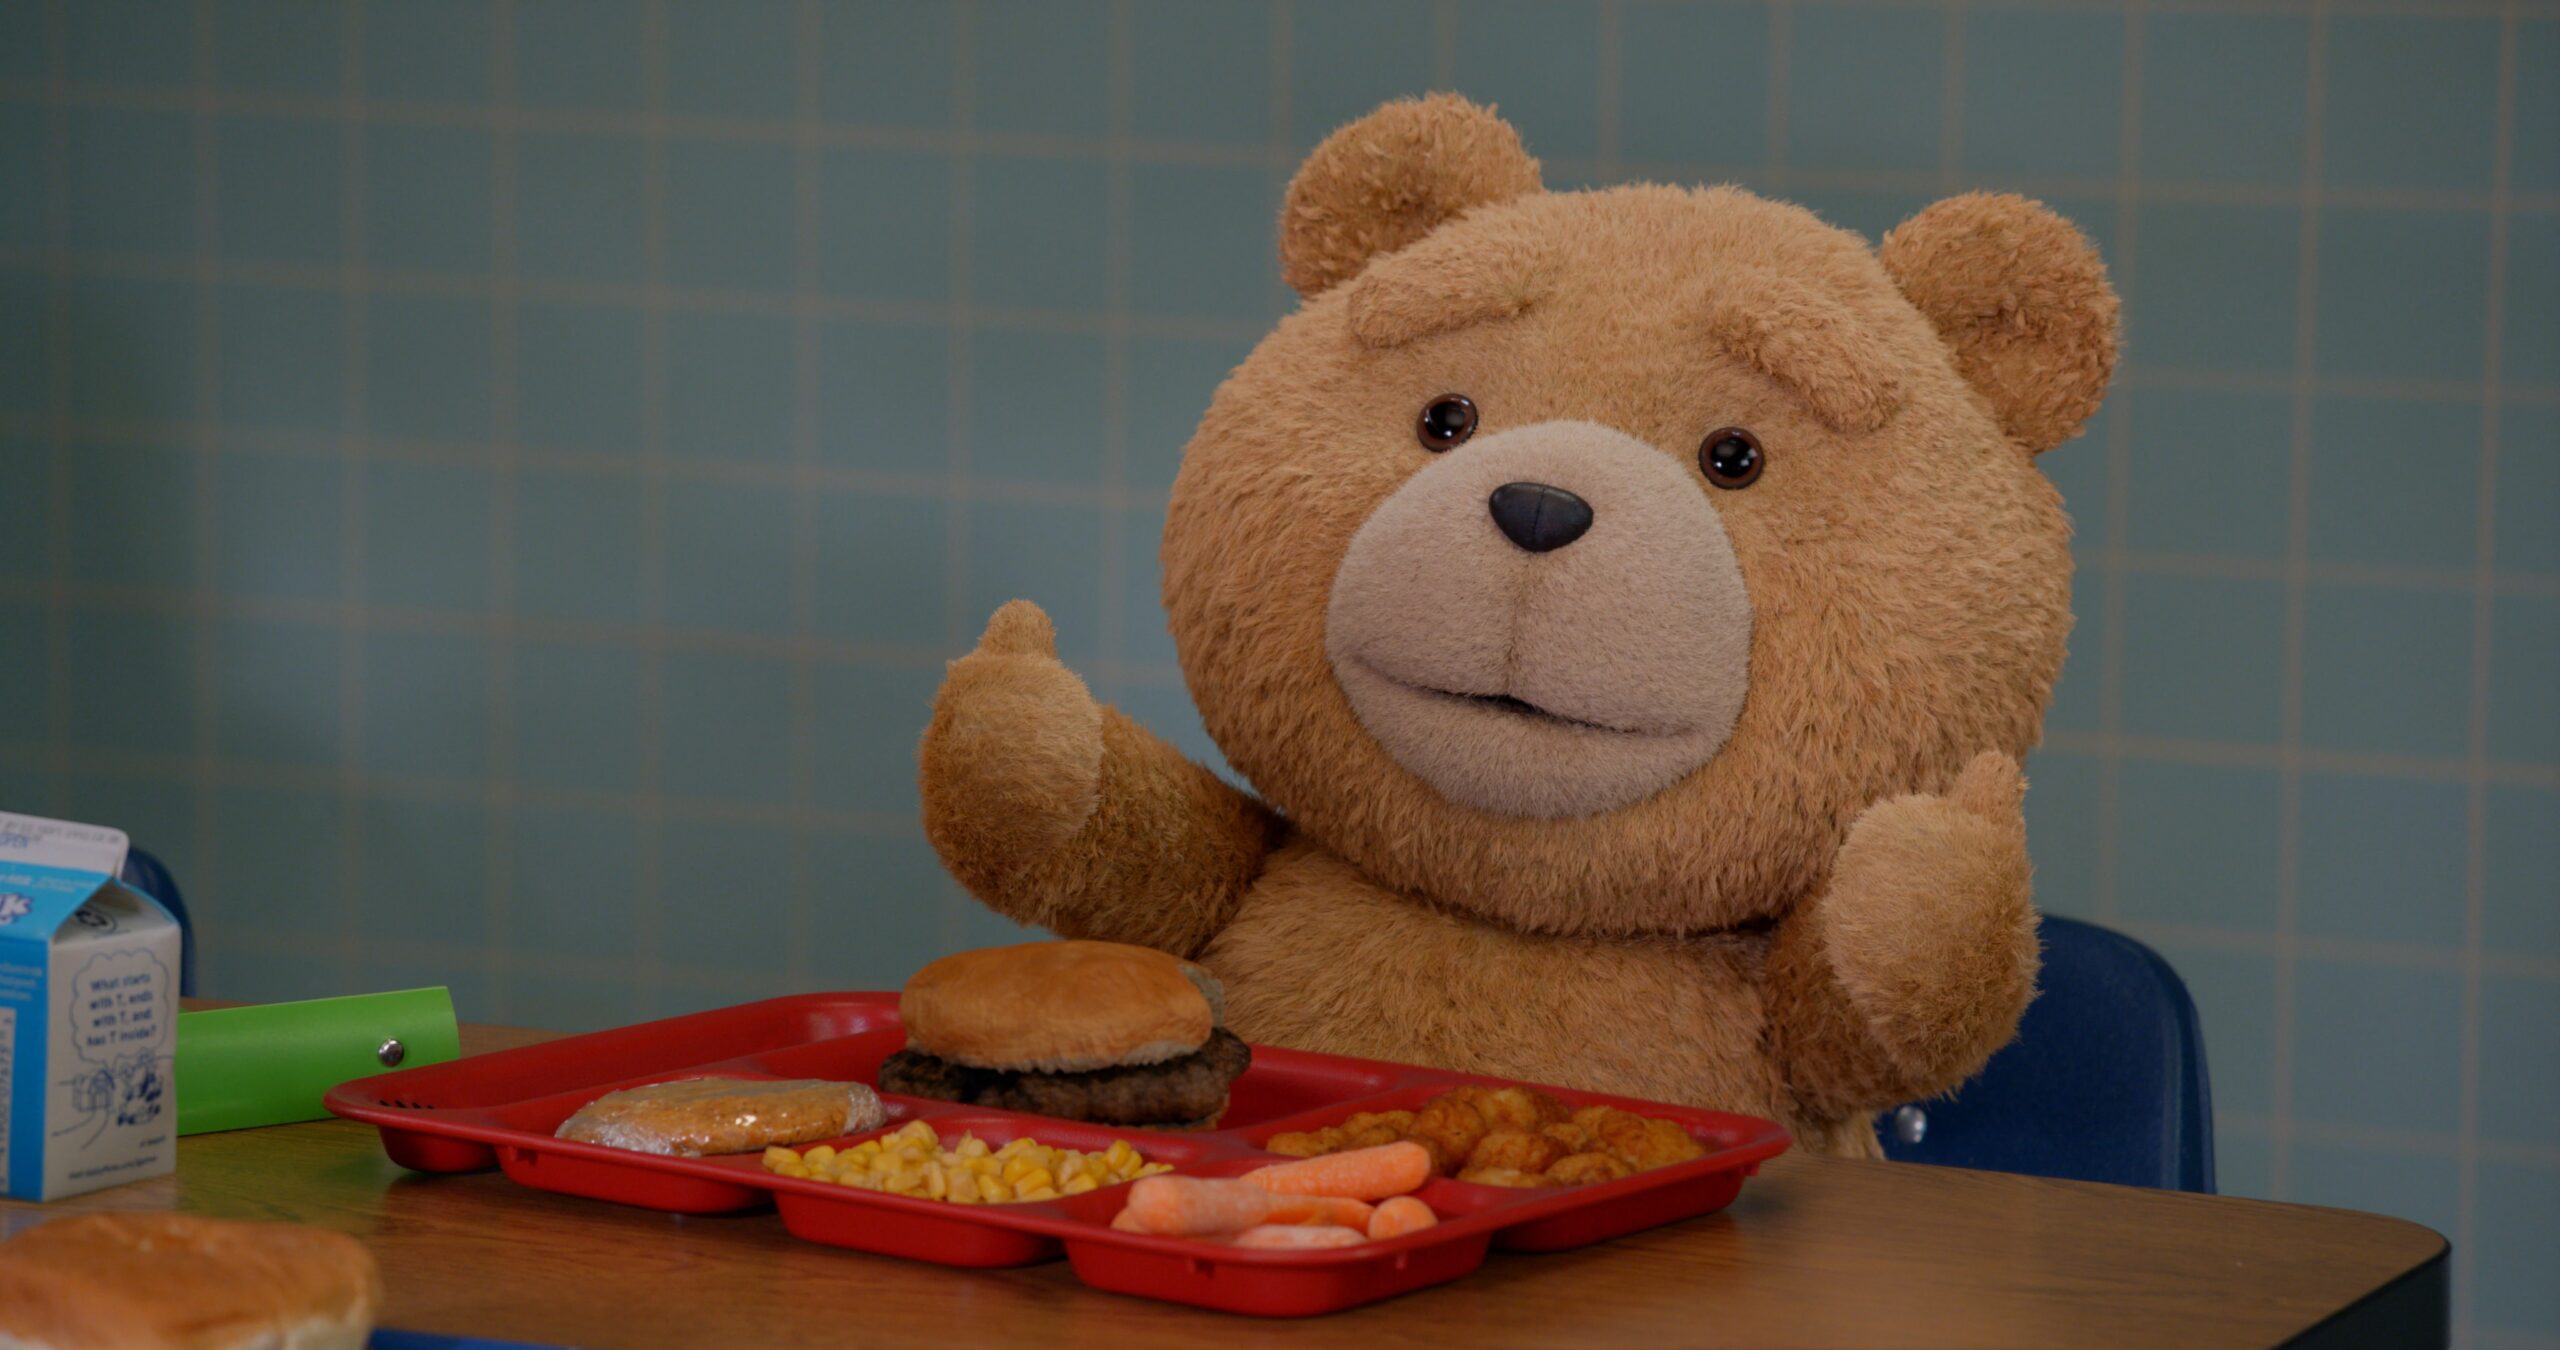 TED – The TV prequel to hit film franchise TED – is set to premiere